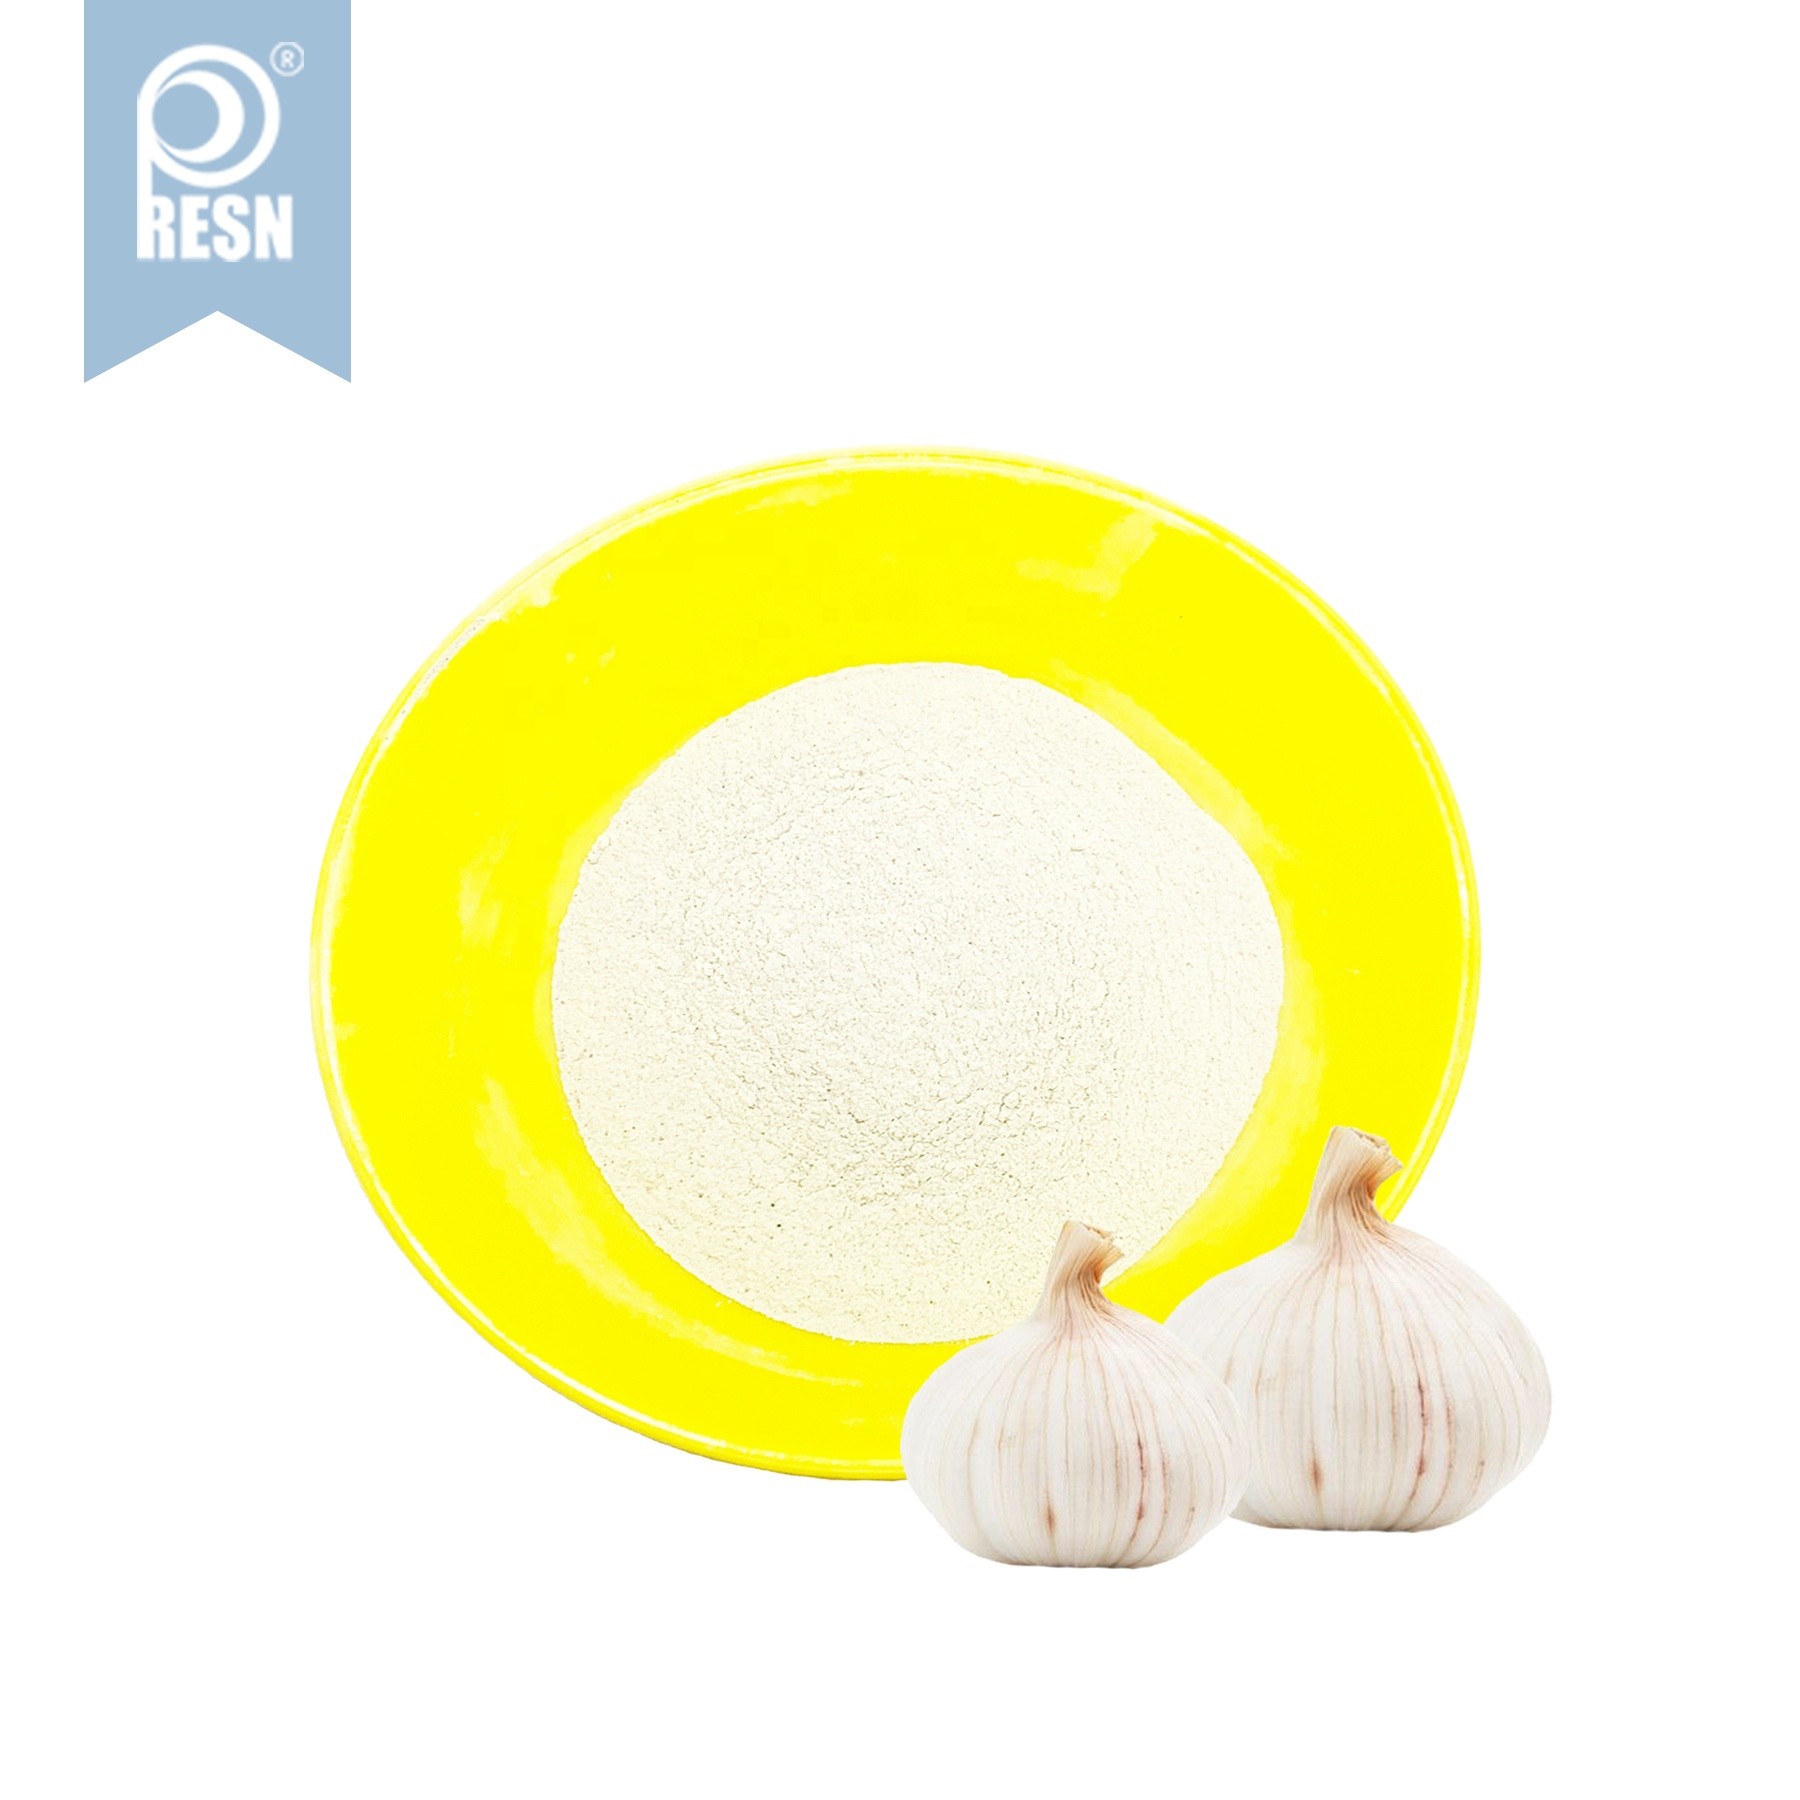 Premium OEM Allicin Powder 30% Garlic Extract Powder Animal Feed Additive for Poultry  Livestock and Aquatic Product